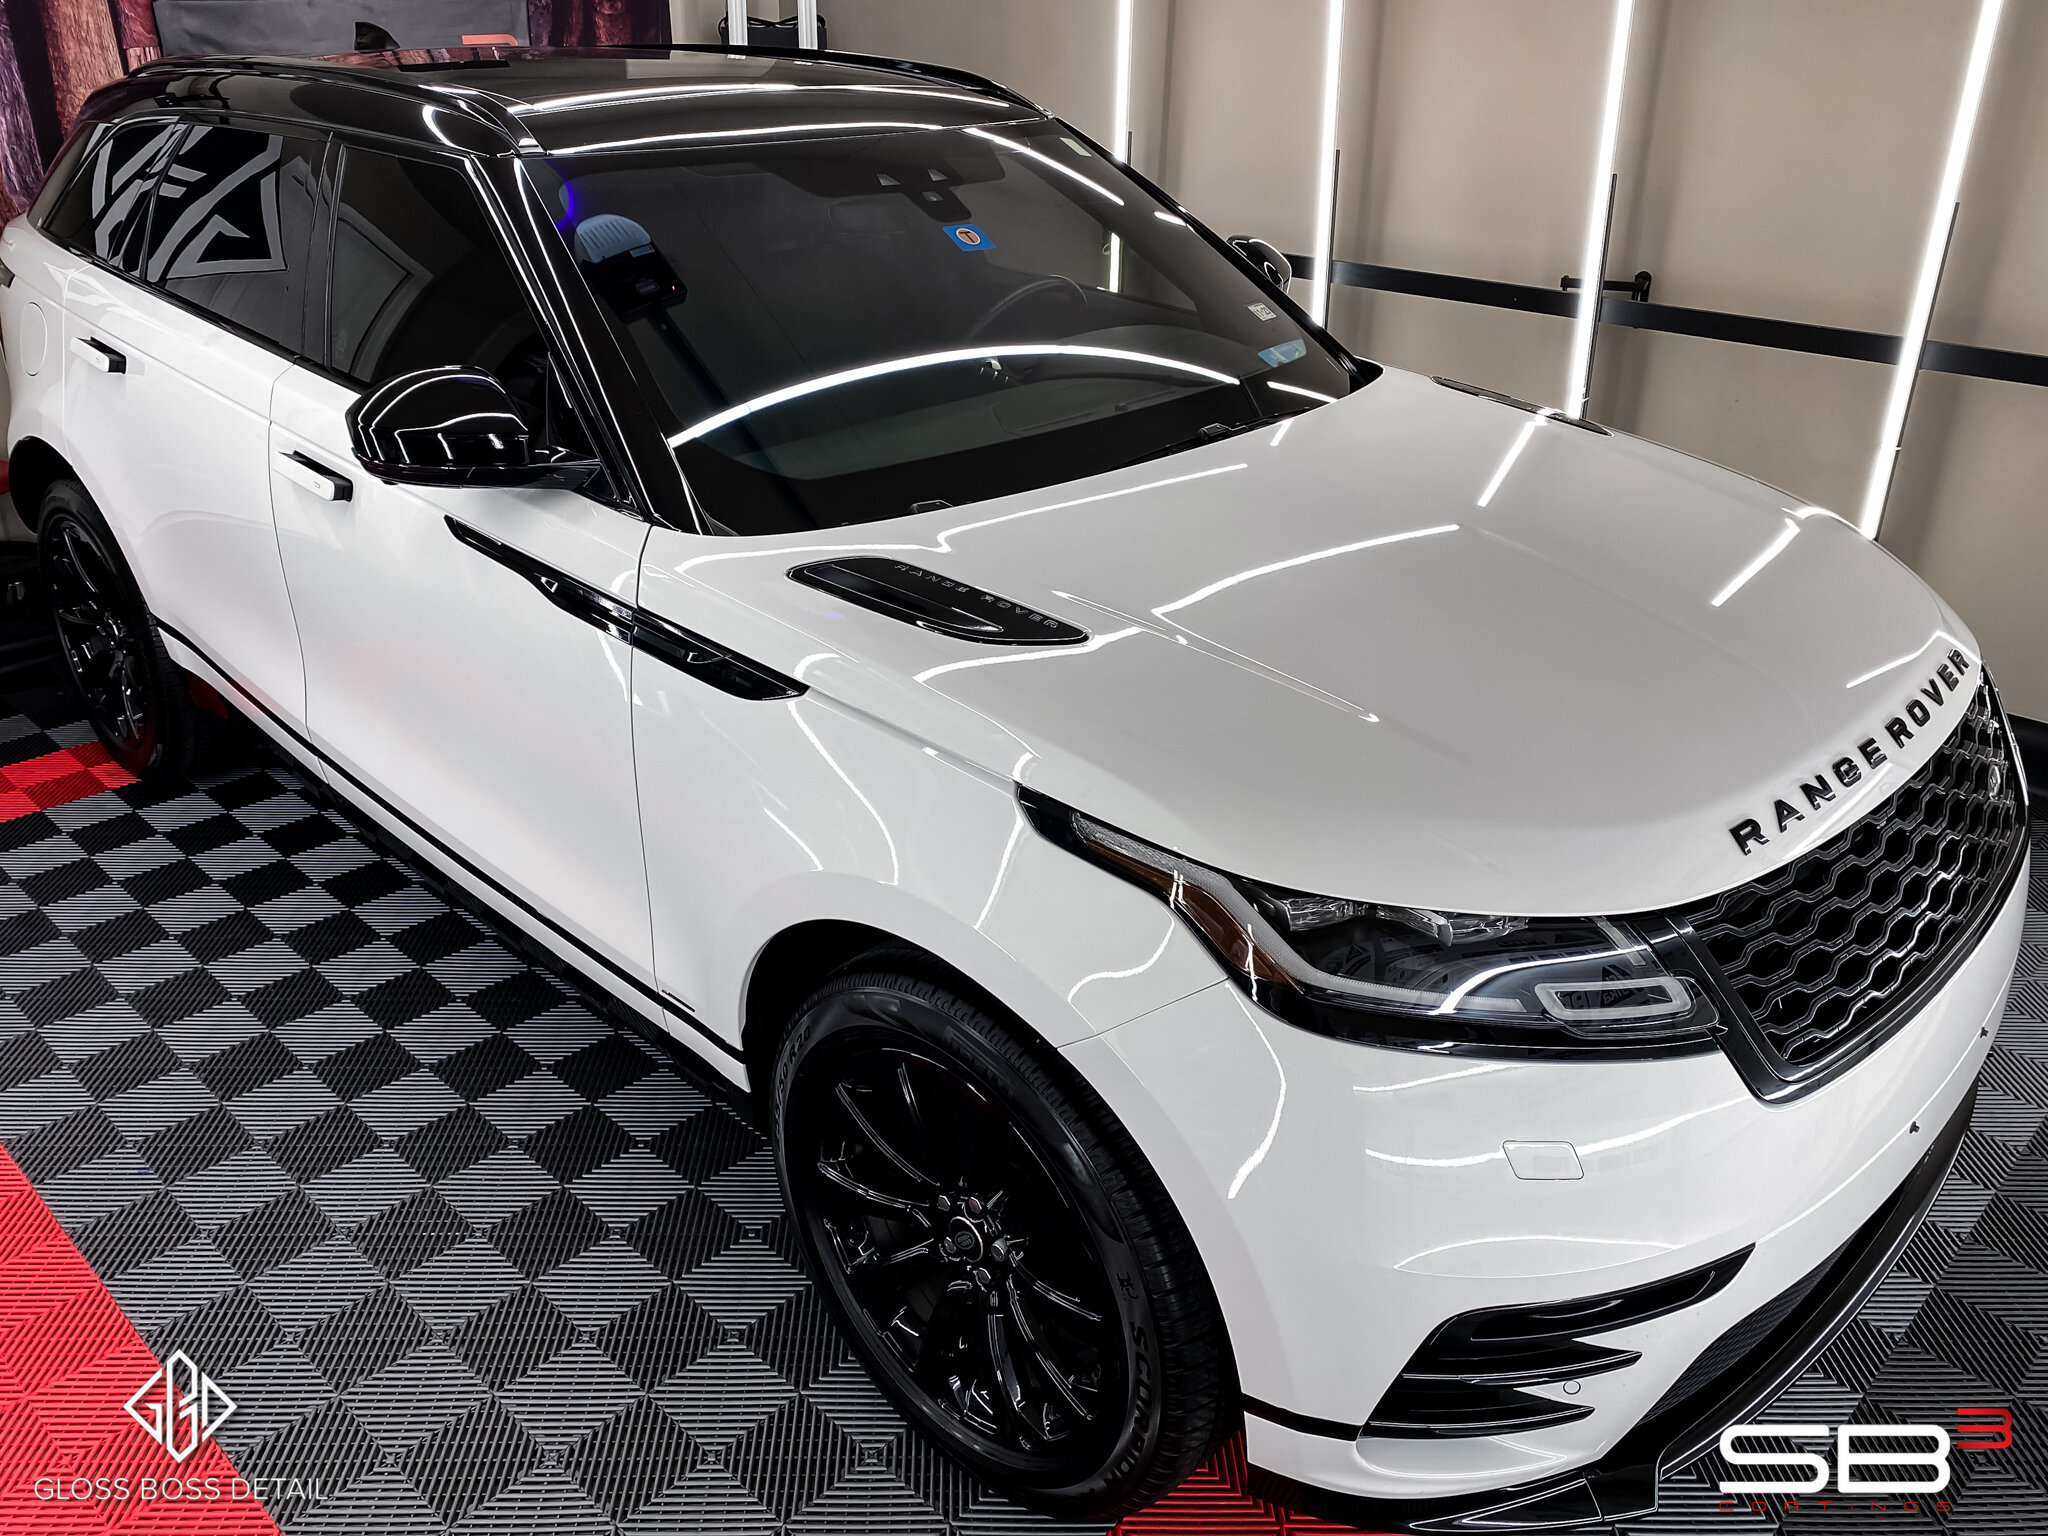 2021 Range Rover Velar
Coating Maintenance &amp; Detail
 
Experience Matters, who&rsquo;s really installing your coating?

No Short-Cut Zone... 
Not With Product, Performance, or Service!

Conventional car waxes and sealants are a product of the past